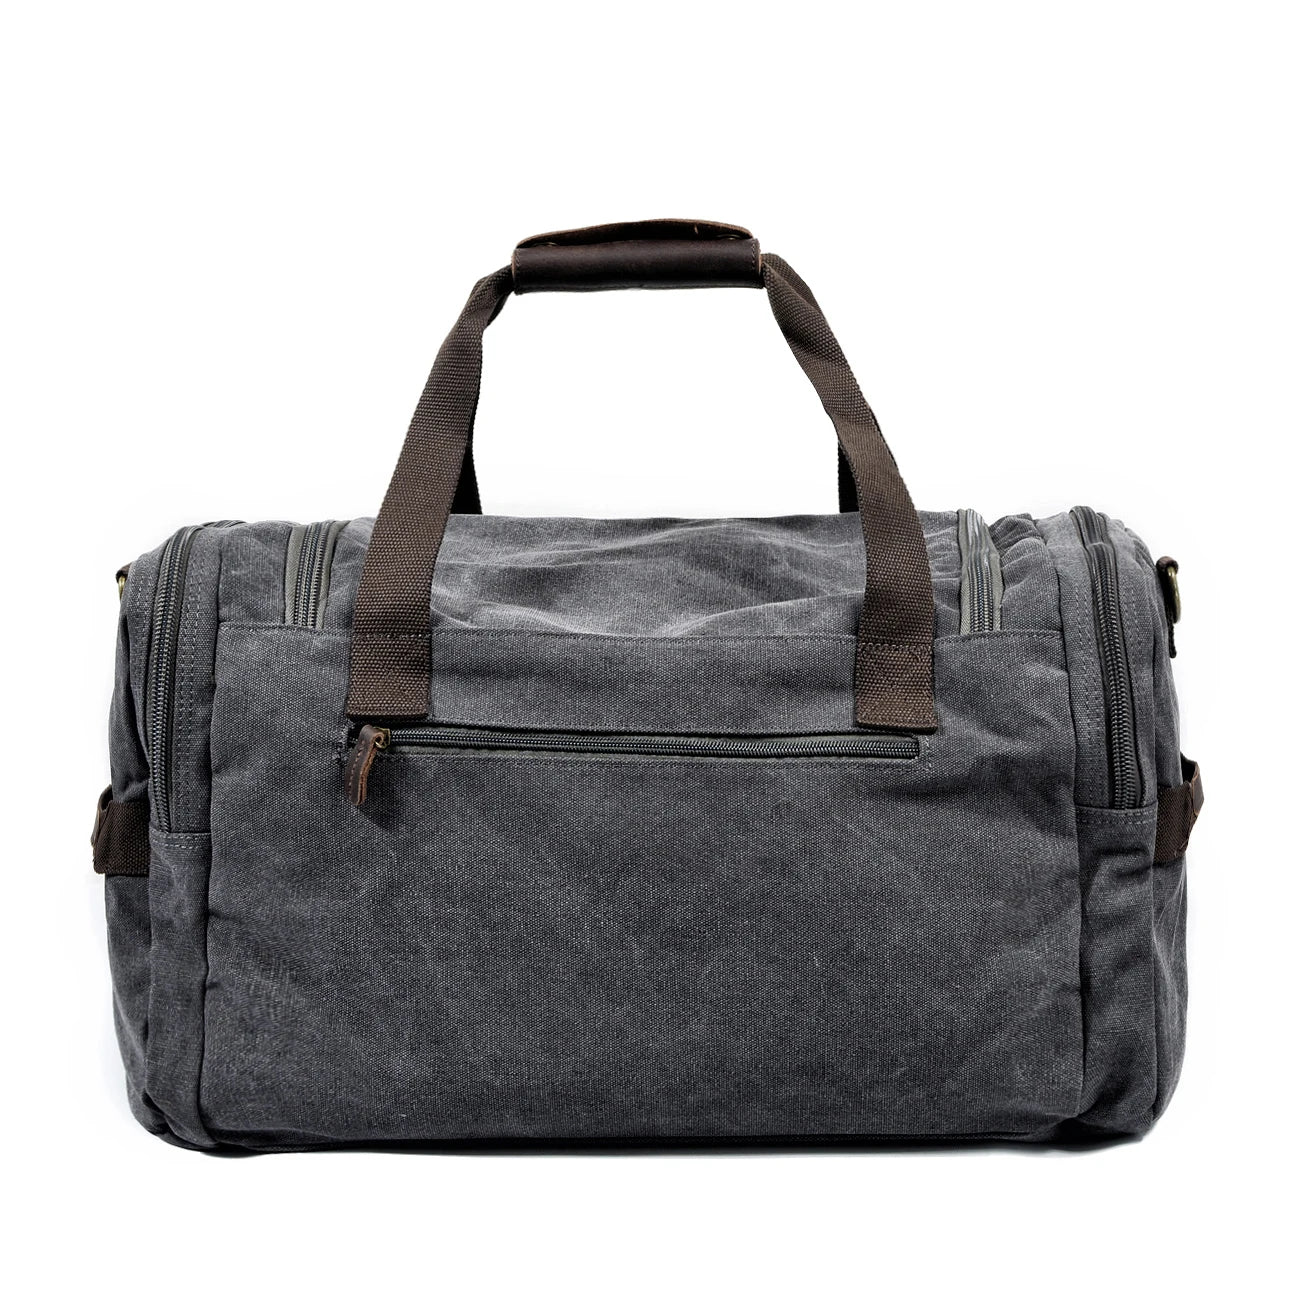 Muchuan Canvas Leather Travel Bag - Stylish and Functional Travel Companion